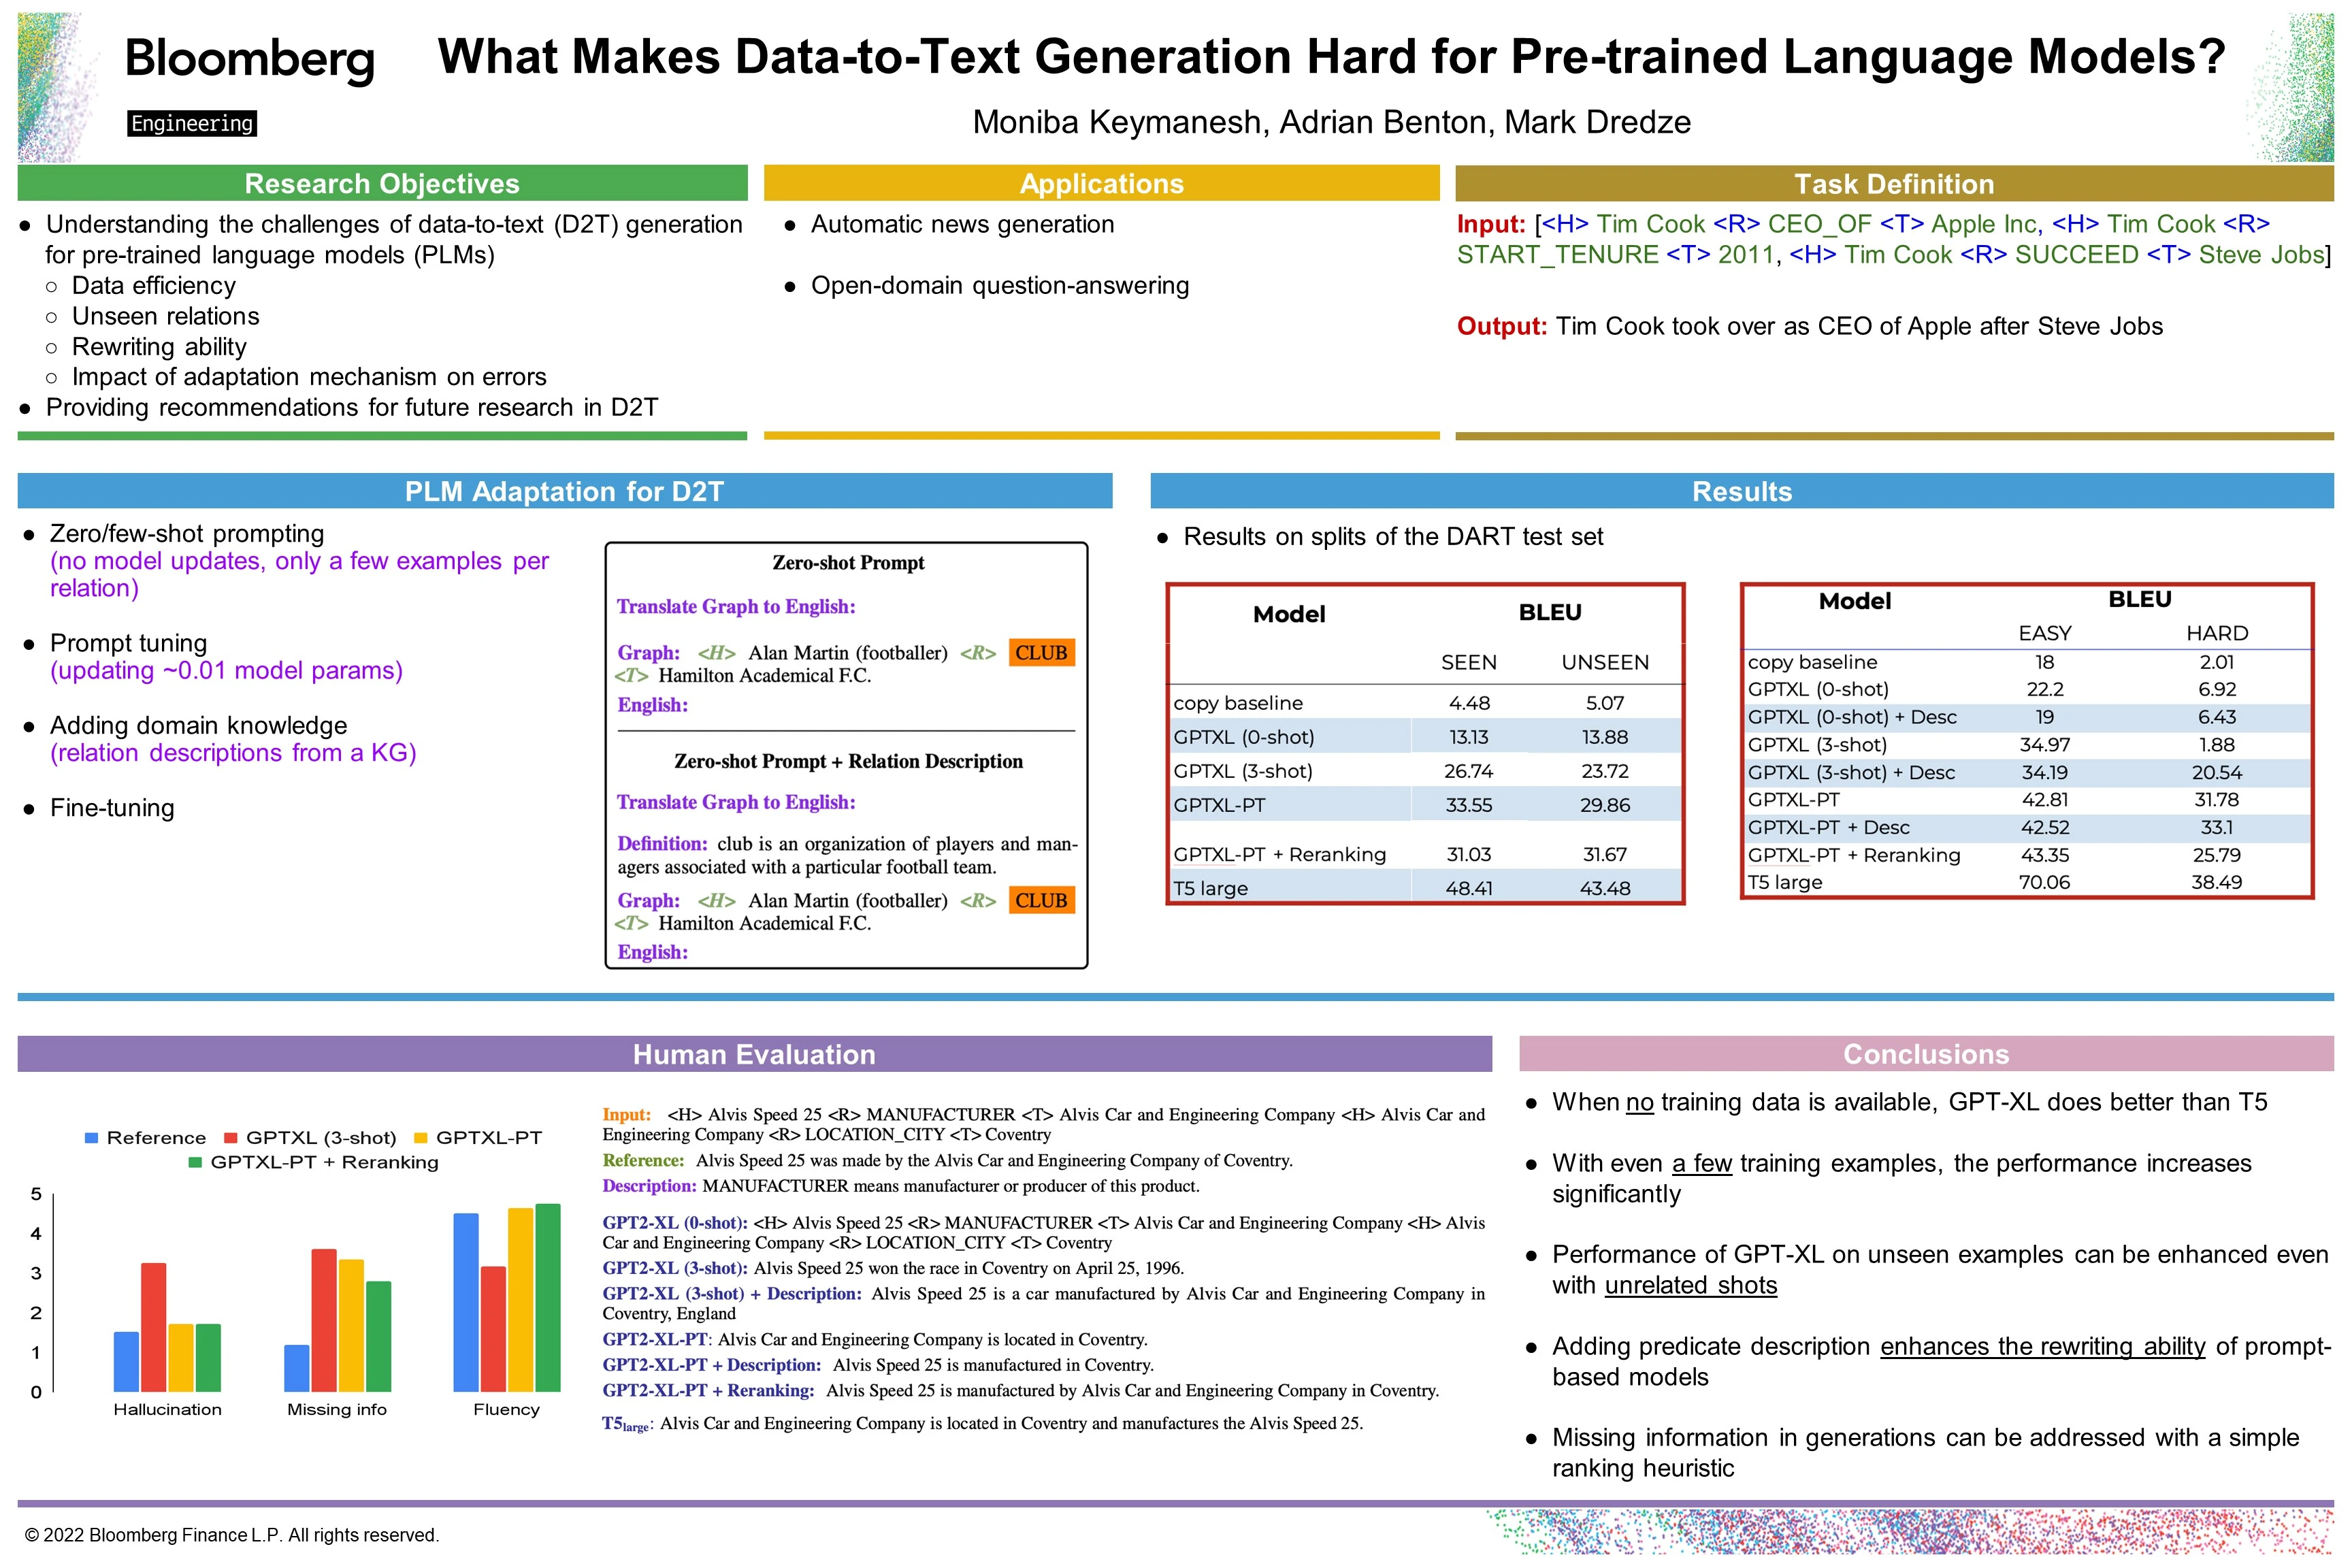 Image of the poster for the paper "What Makes Data-to-Text Generation Hard for Pretrained Language Models?" that Moniba Keymanesh, Adrian Benton & Mark Dredze are presenting during the virtual poster session in the 2nd Generation, Evaluation & Metrics (GEM) Workshop at EMNLP 2022 on Wednesday, December 7, 2022.